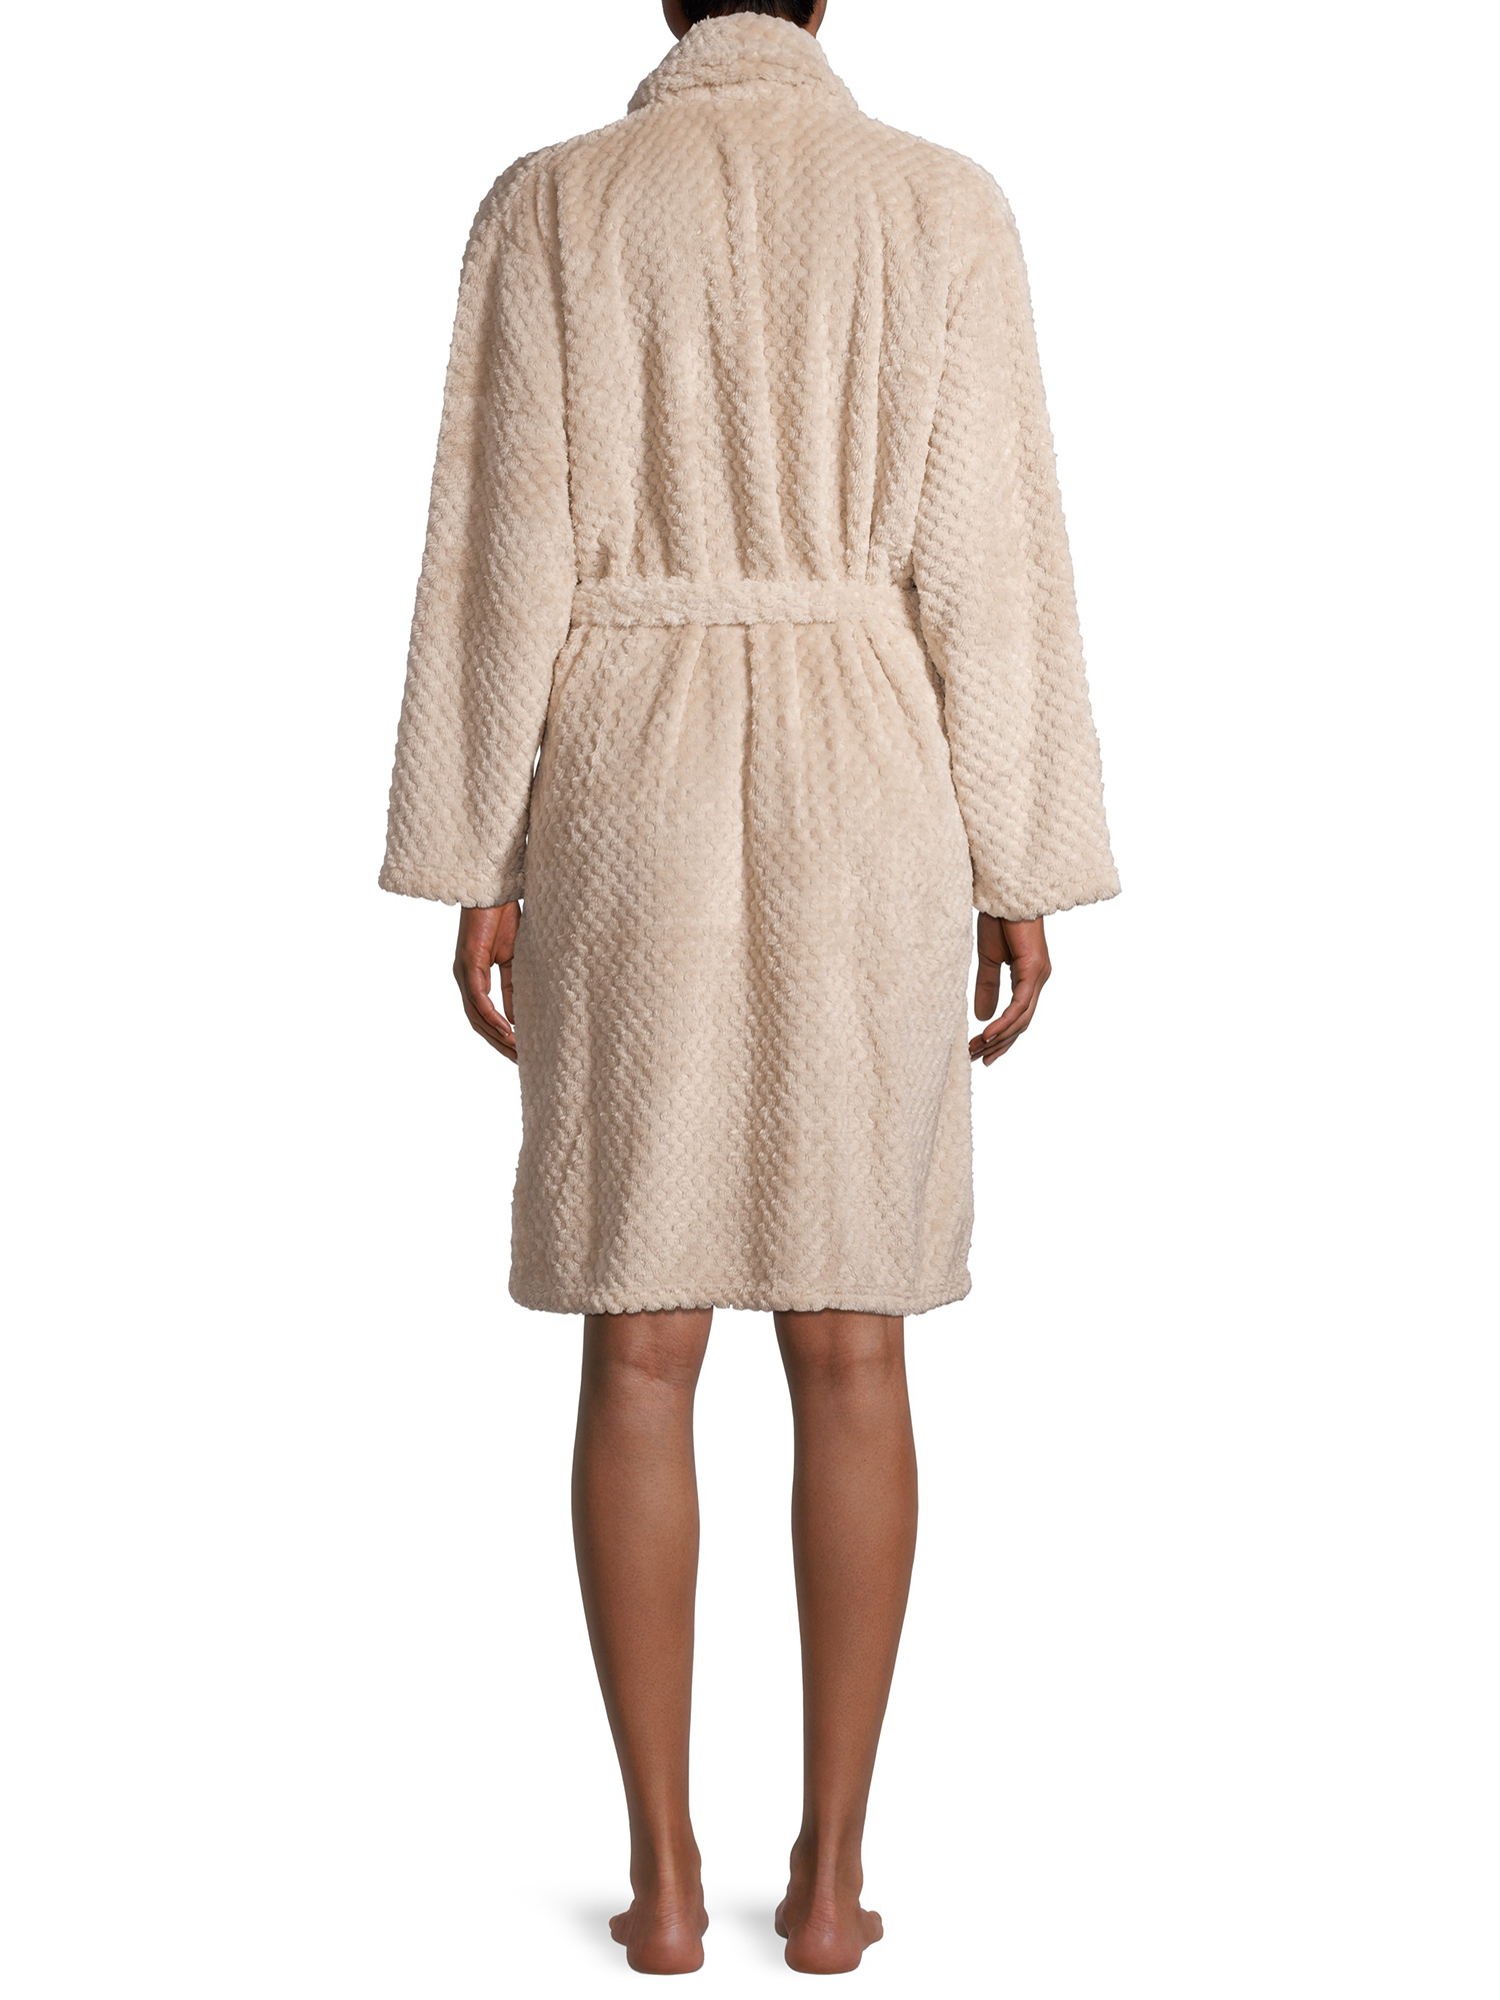 The Cozy Corner Club Durable Easy Care Textured Evening Robe (Women's), 1 Pack - image 2 of 7